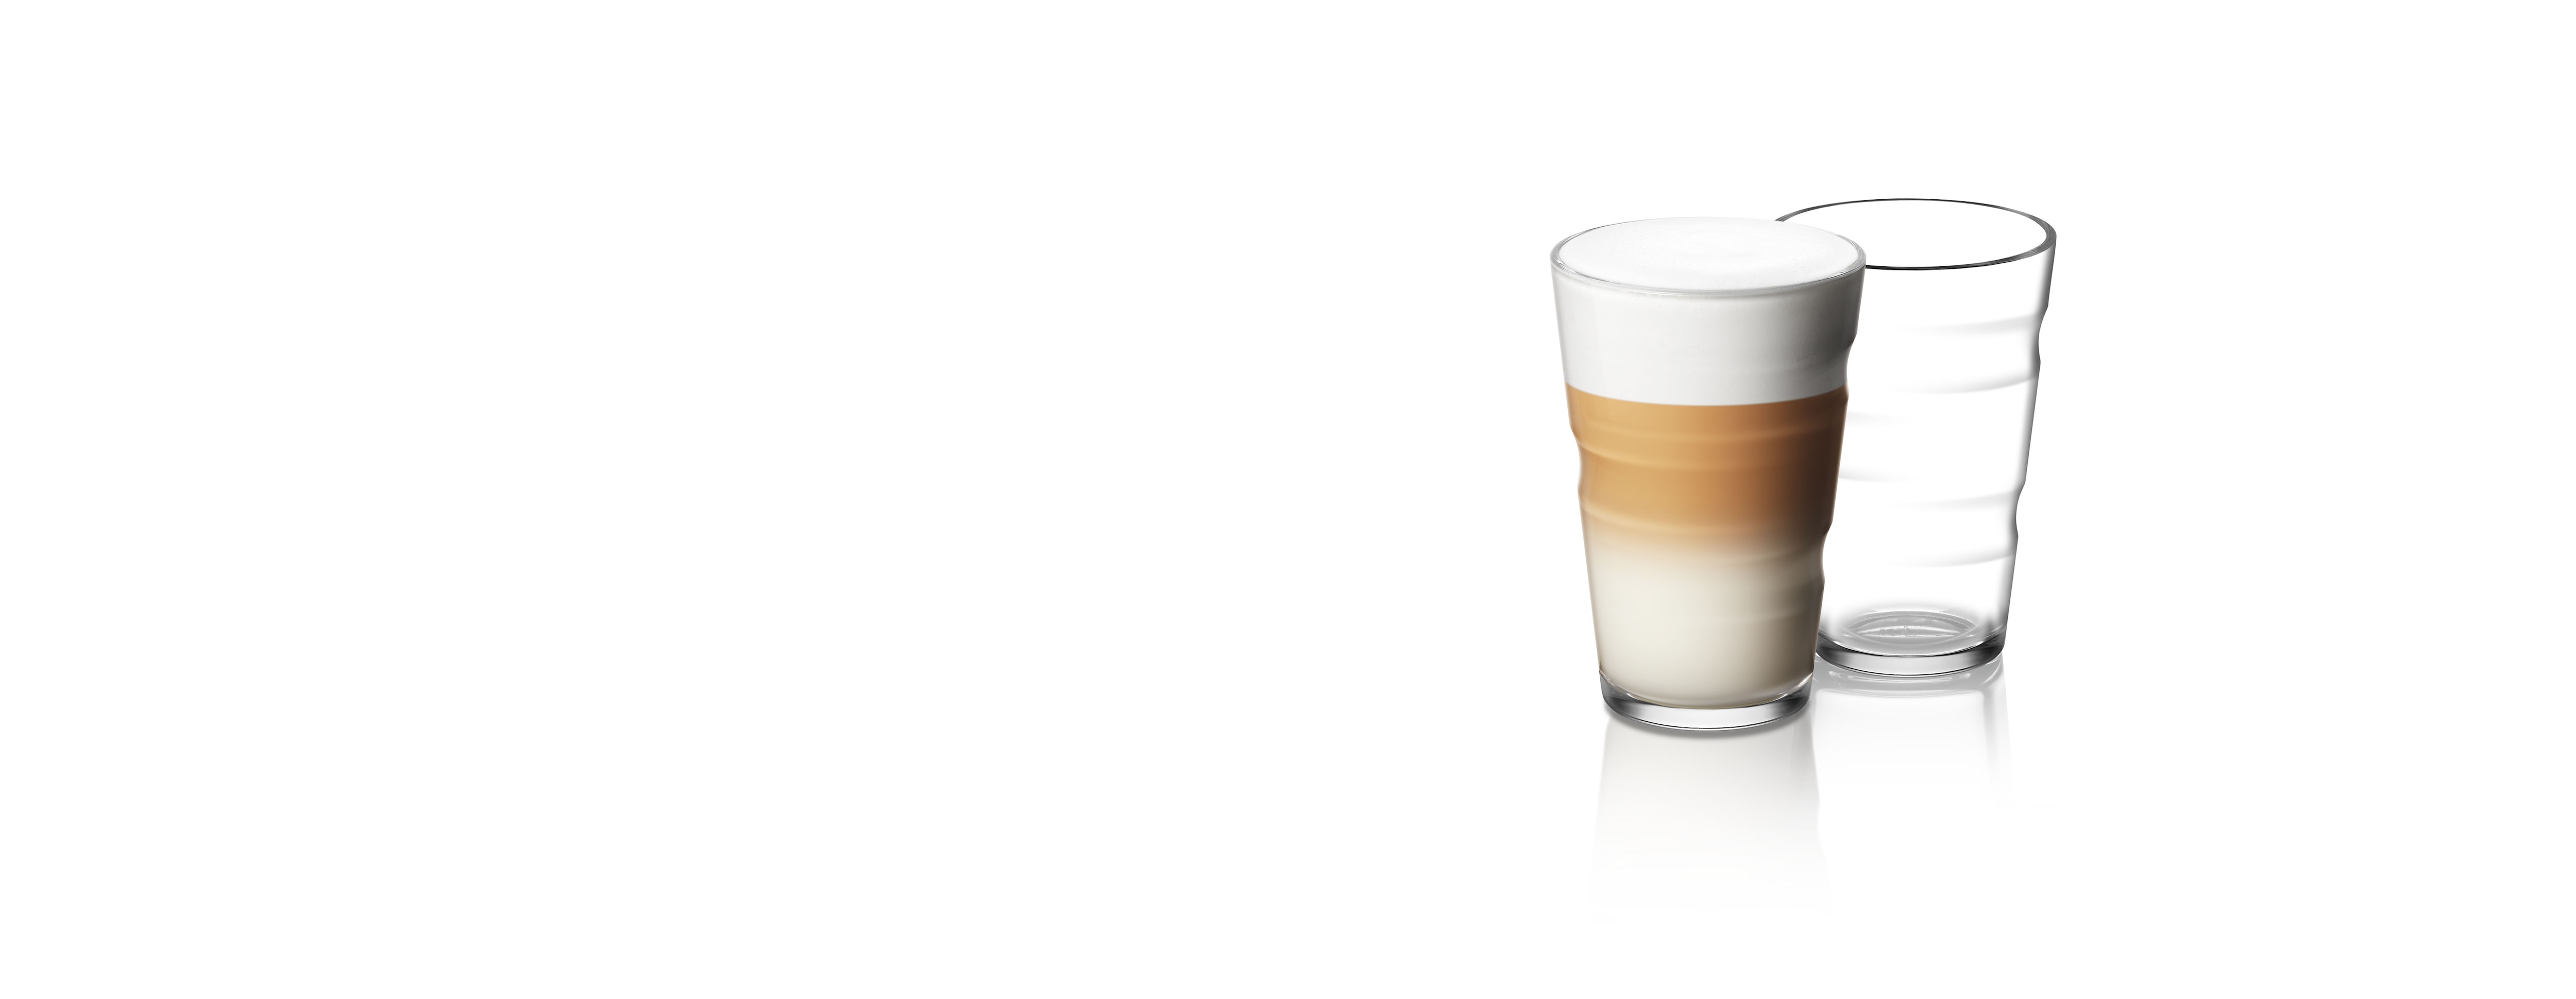 Nespresso Kitchen | Set of 2 View Recipe Glasses | Color: Red | Size: Os | Dayndayn's Closet